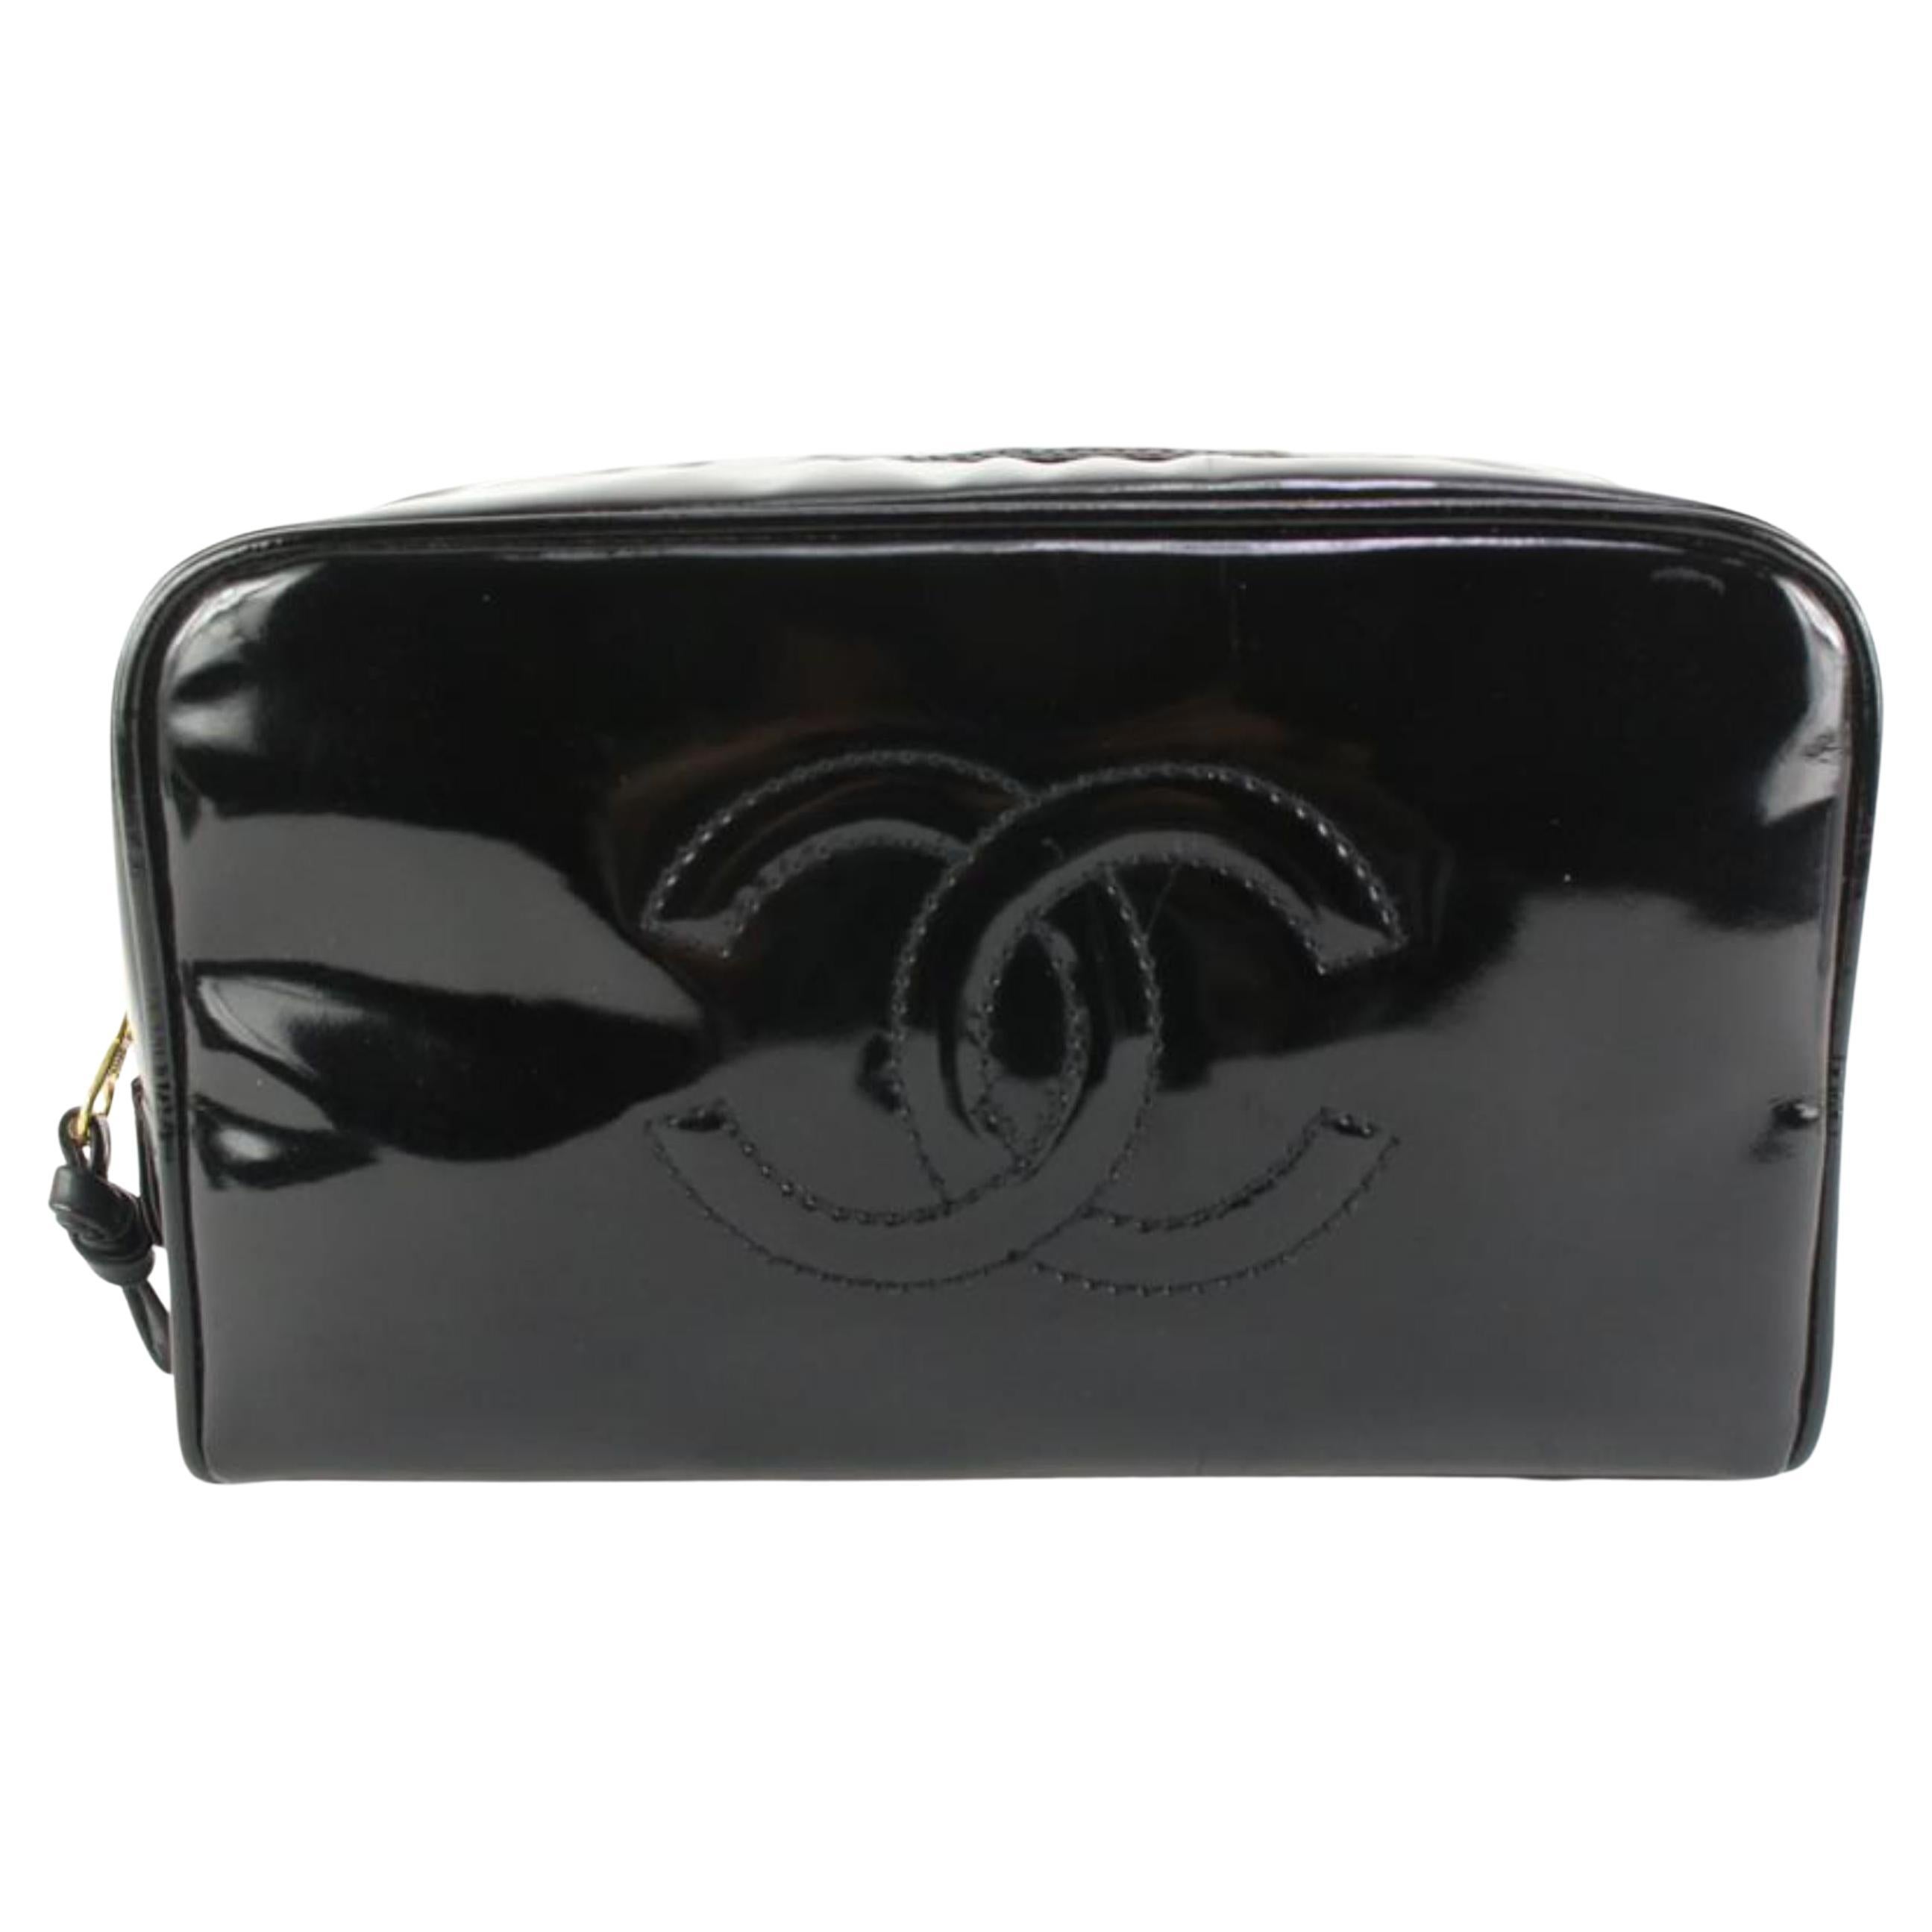 Chanel Black Patent CC Logo Toiletry Pouch Cosmetic Case 81cz56s